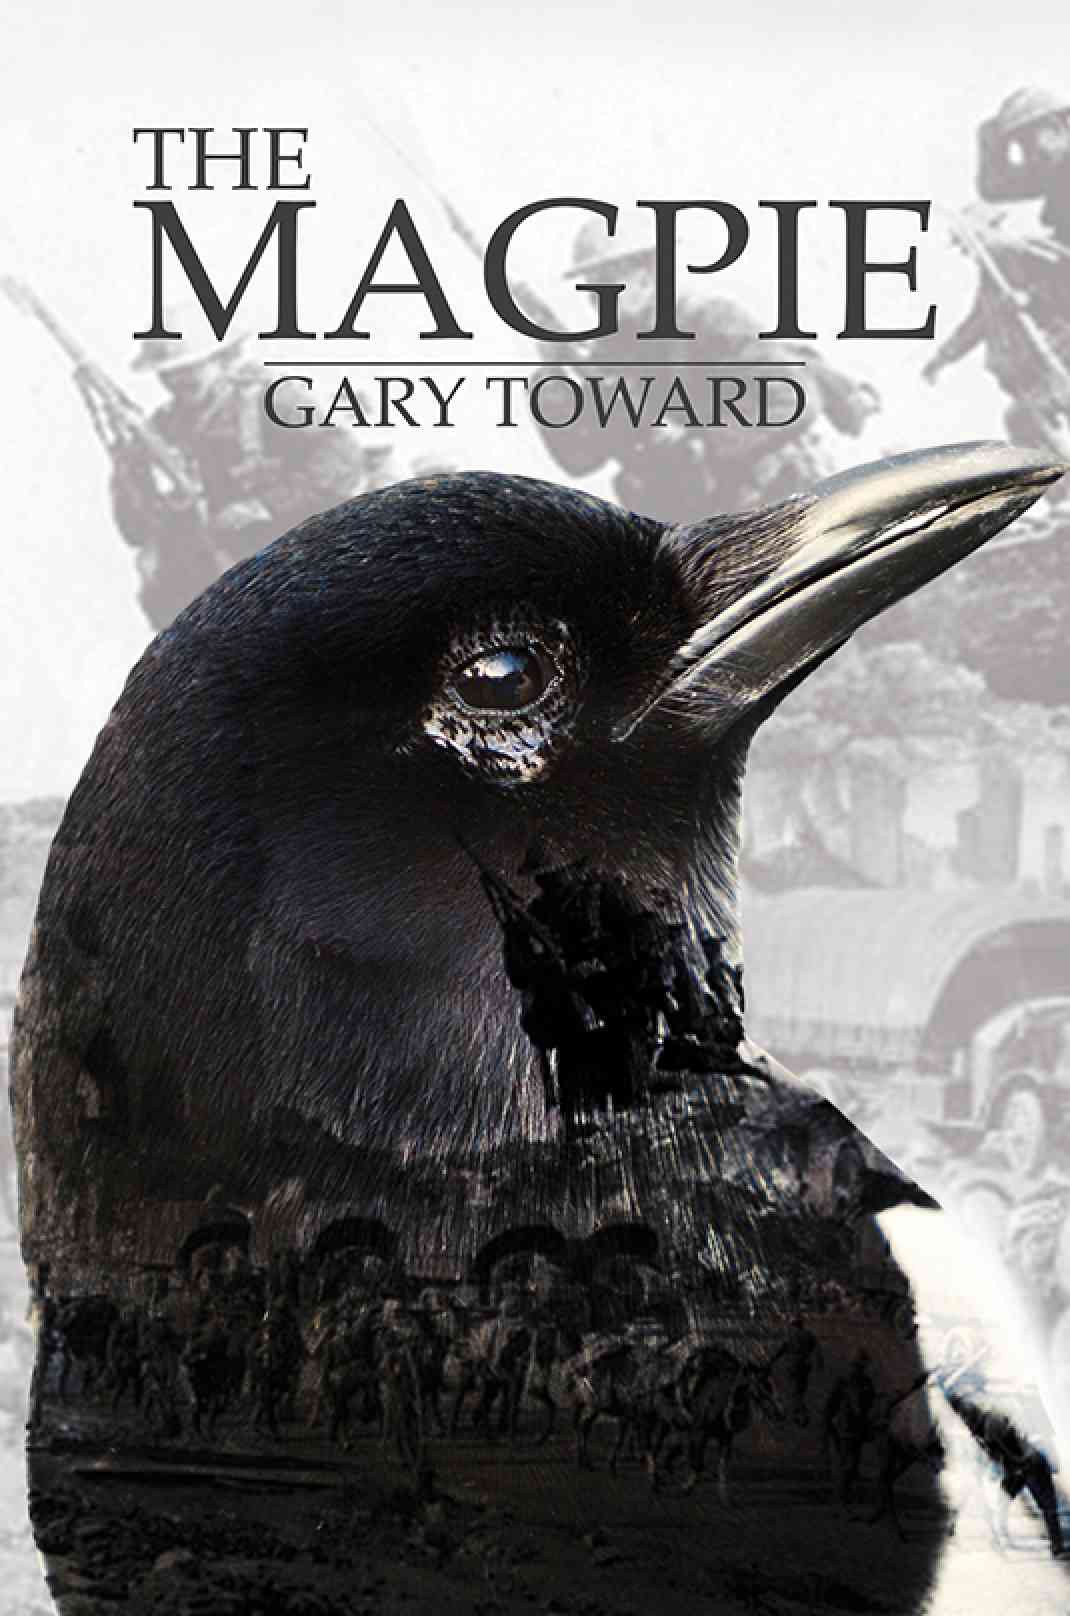 YouTube video on “The Magpie” by Gary Toward